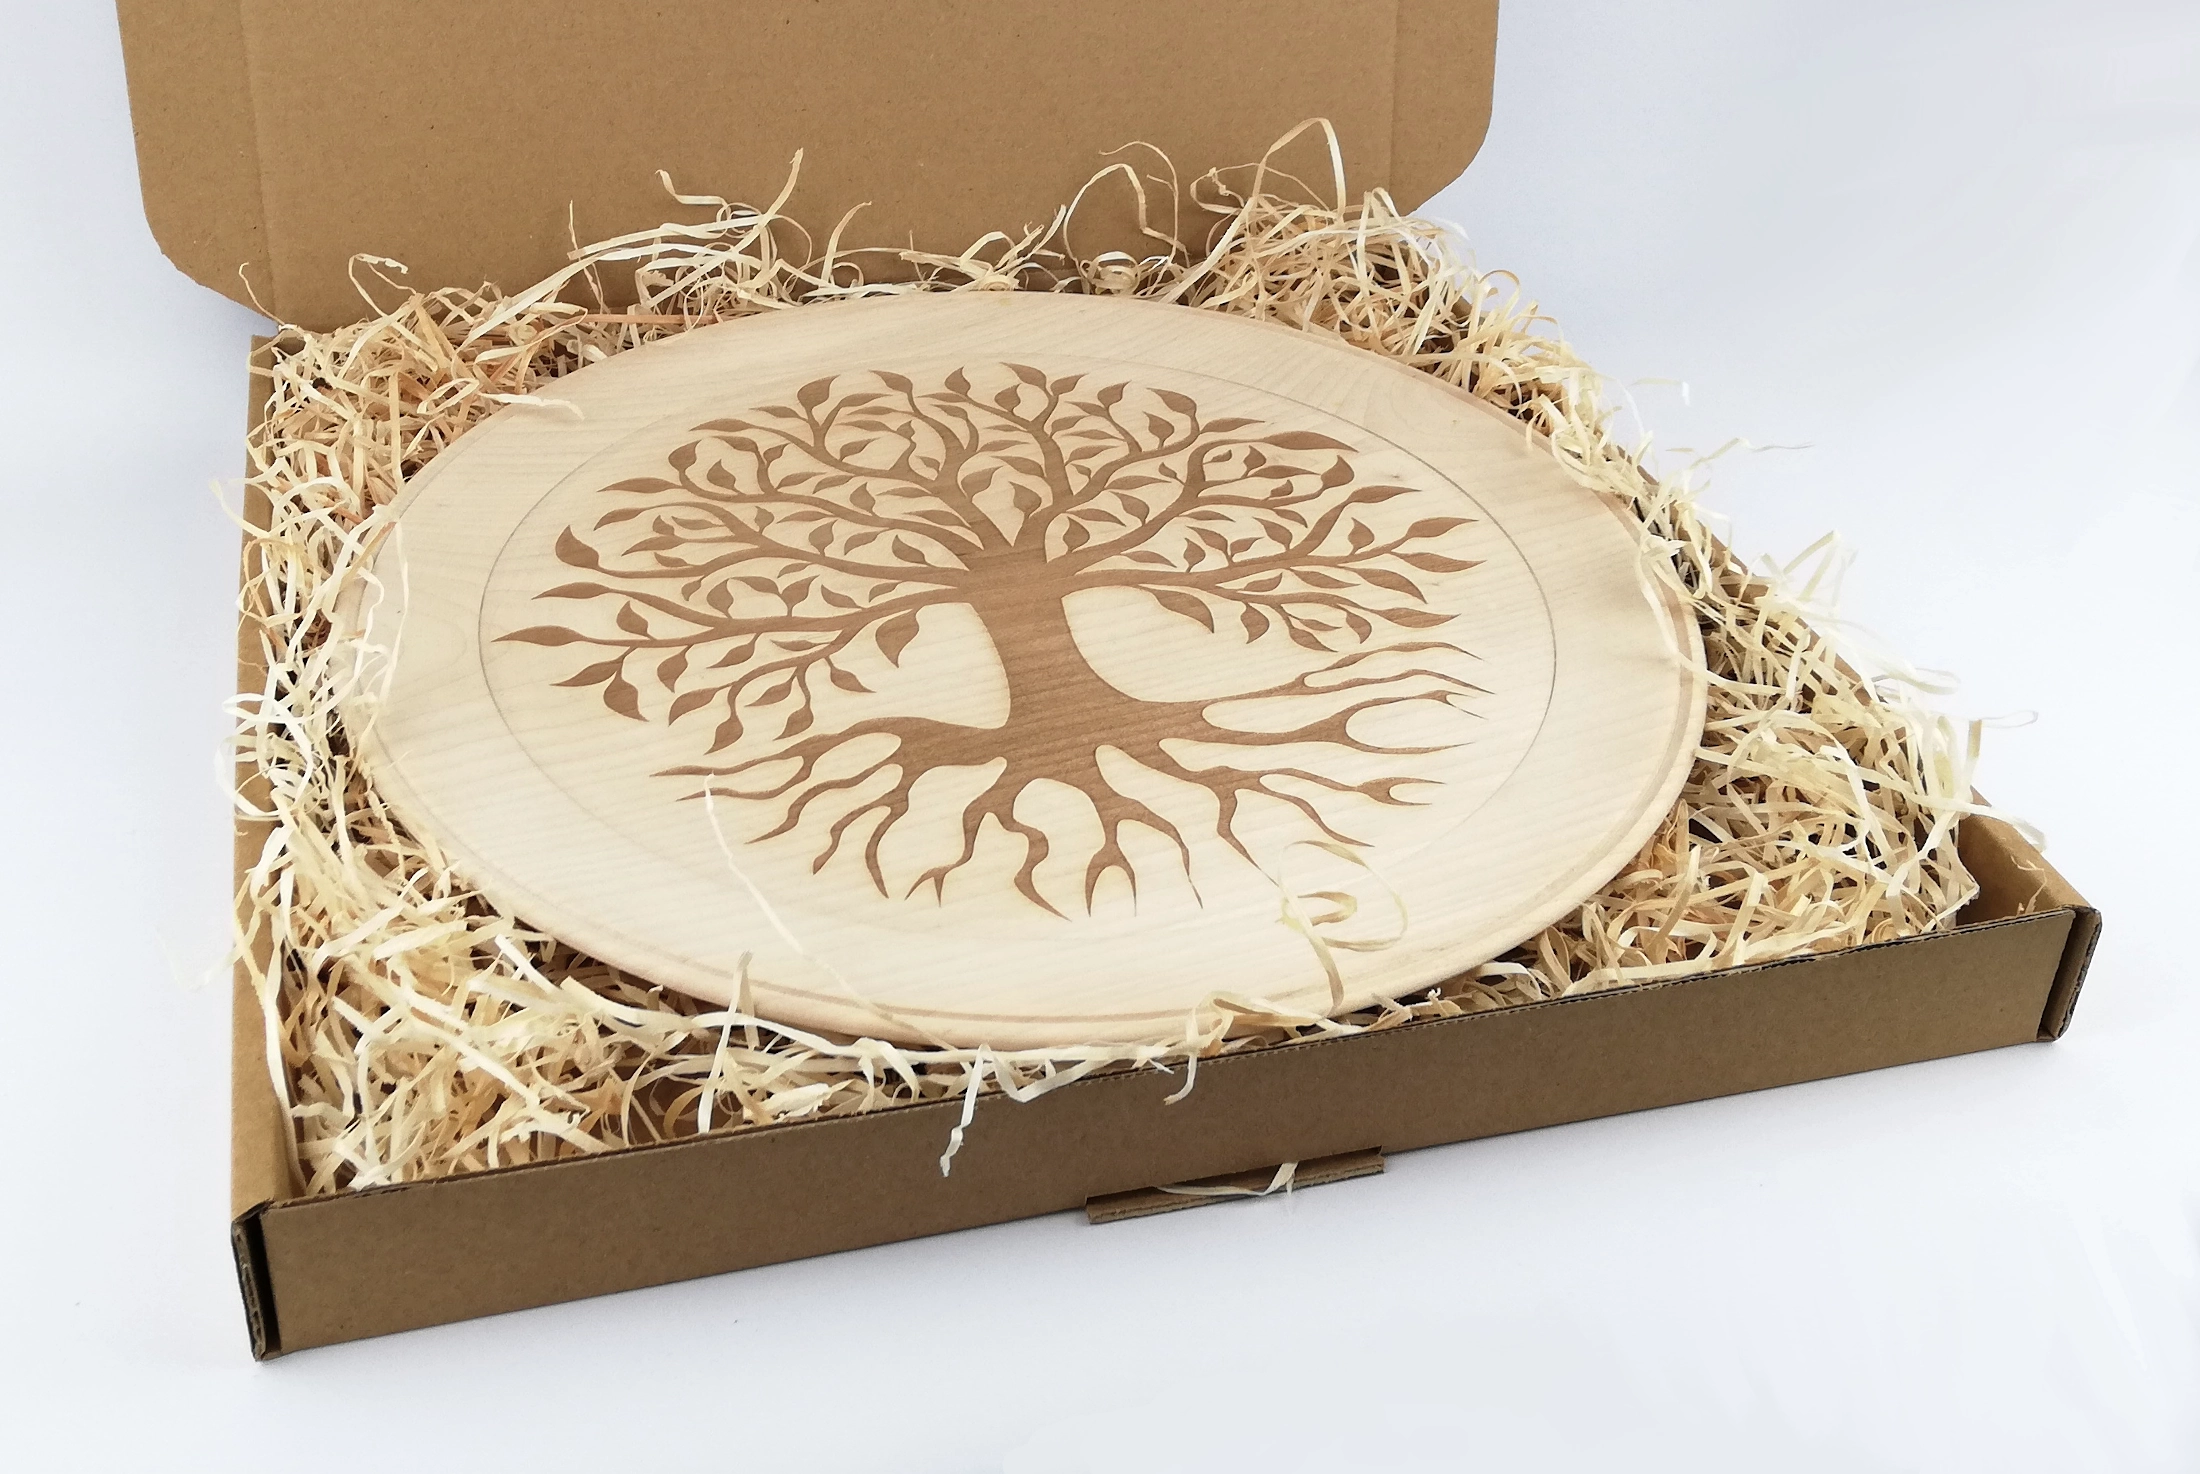 Tree of life (version 1) on a big plate (32cm/12.6in in diameter), packed in a box.